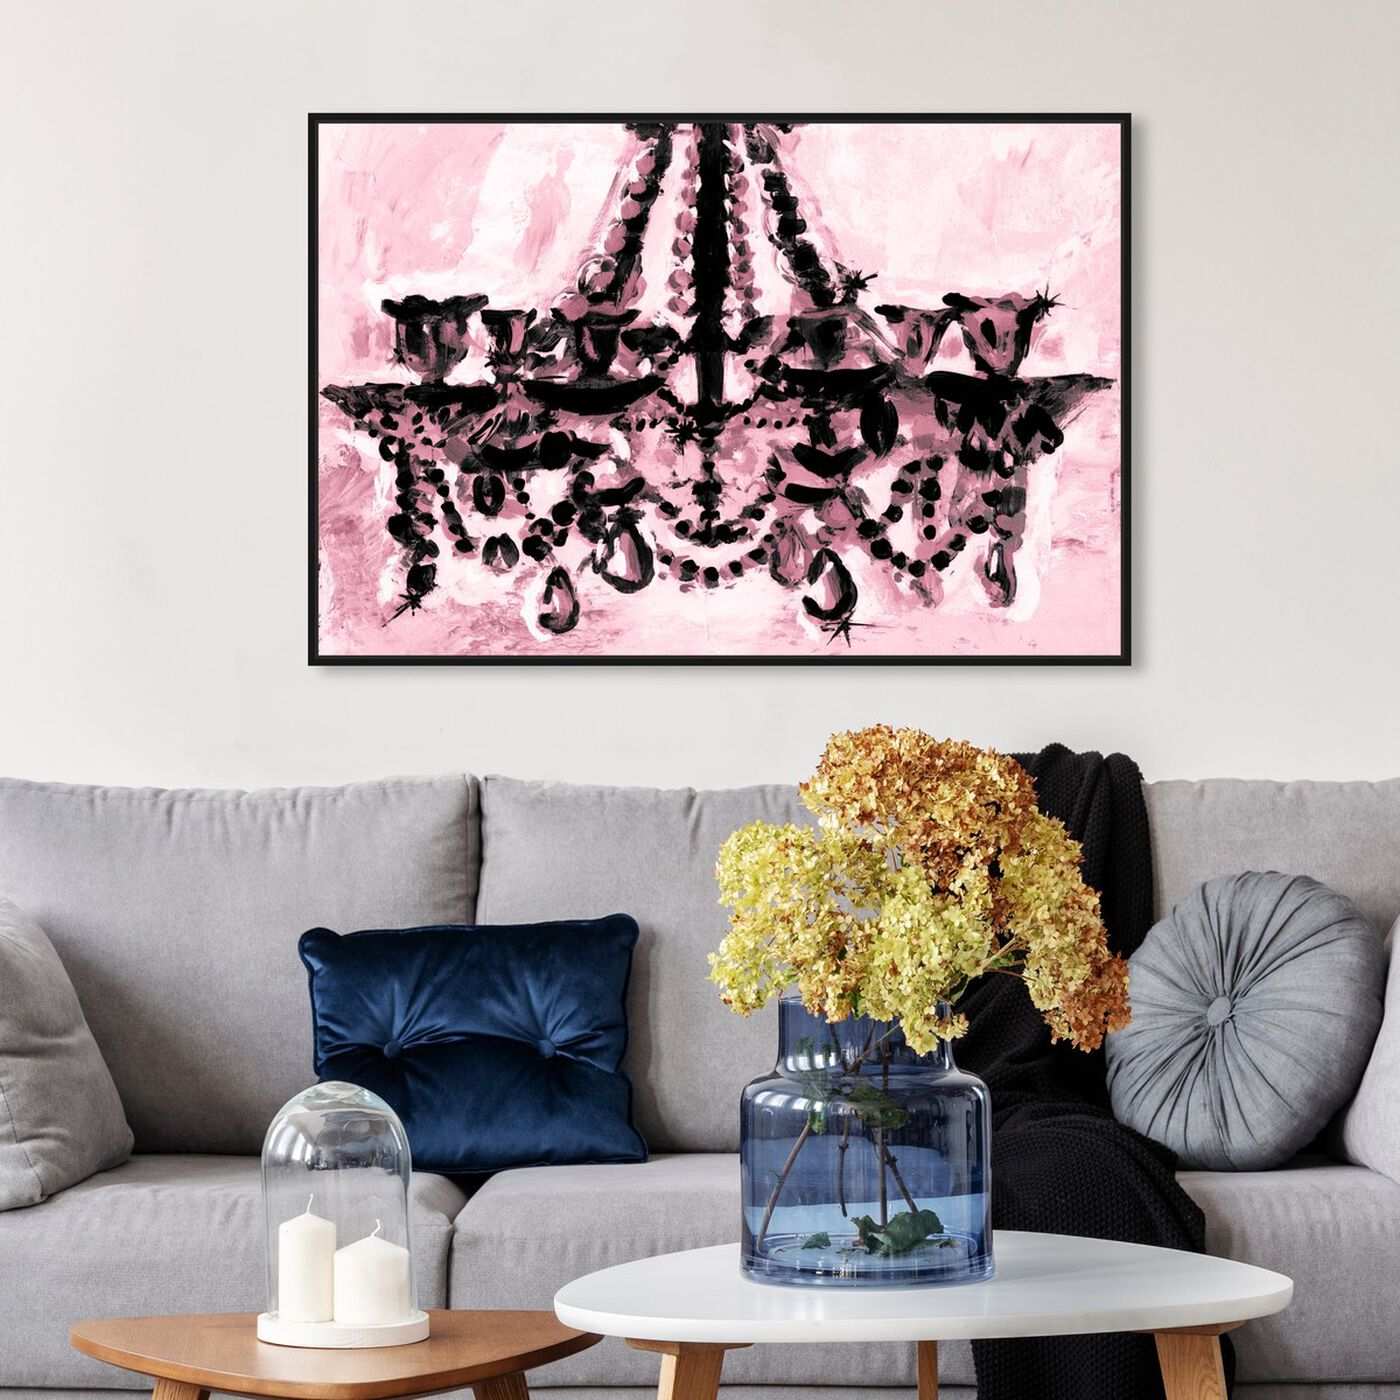 Hanging view of Rosa y Negro featuring fashion and glam and chandeliers art.